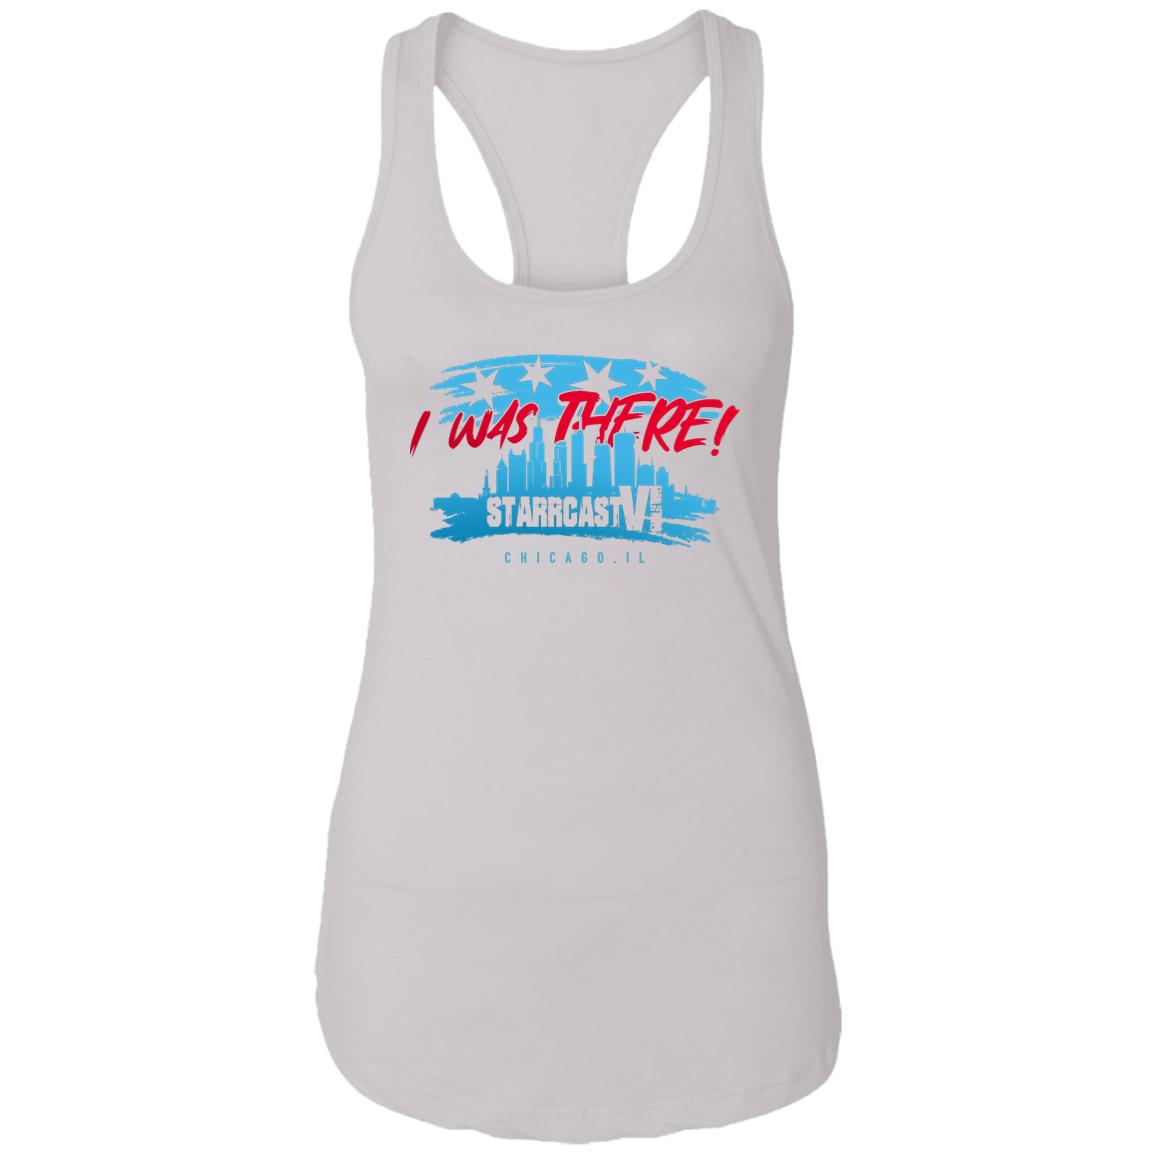 SCVI "I Was There" CHI- Ladies Racerback Tank